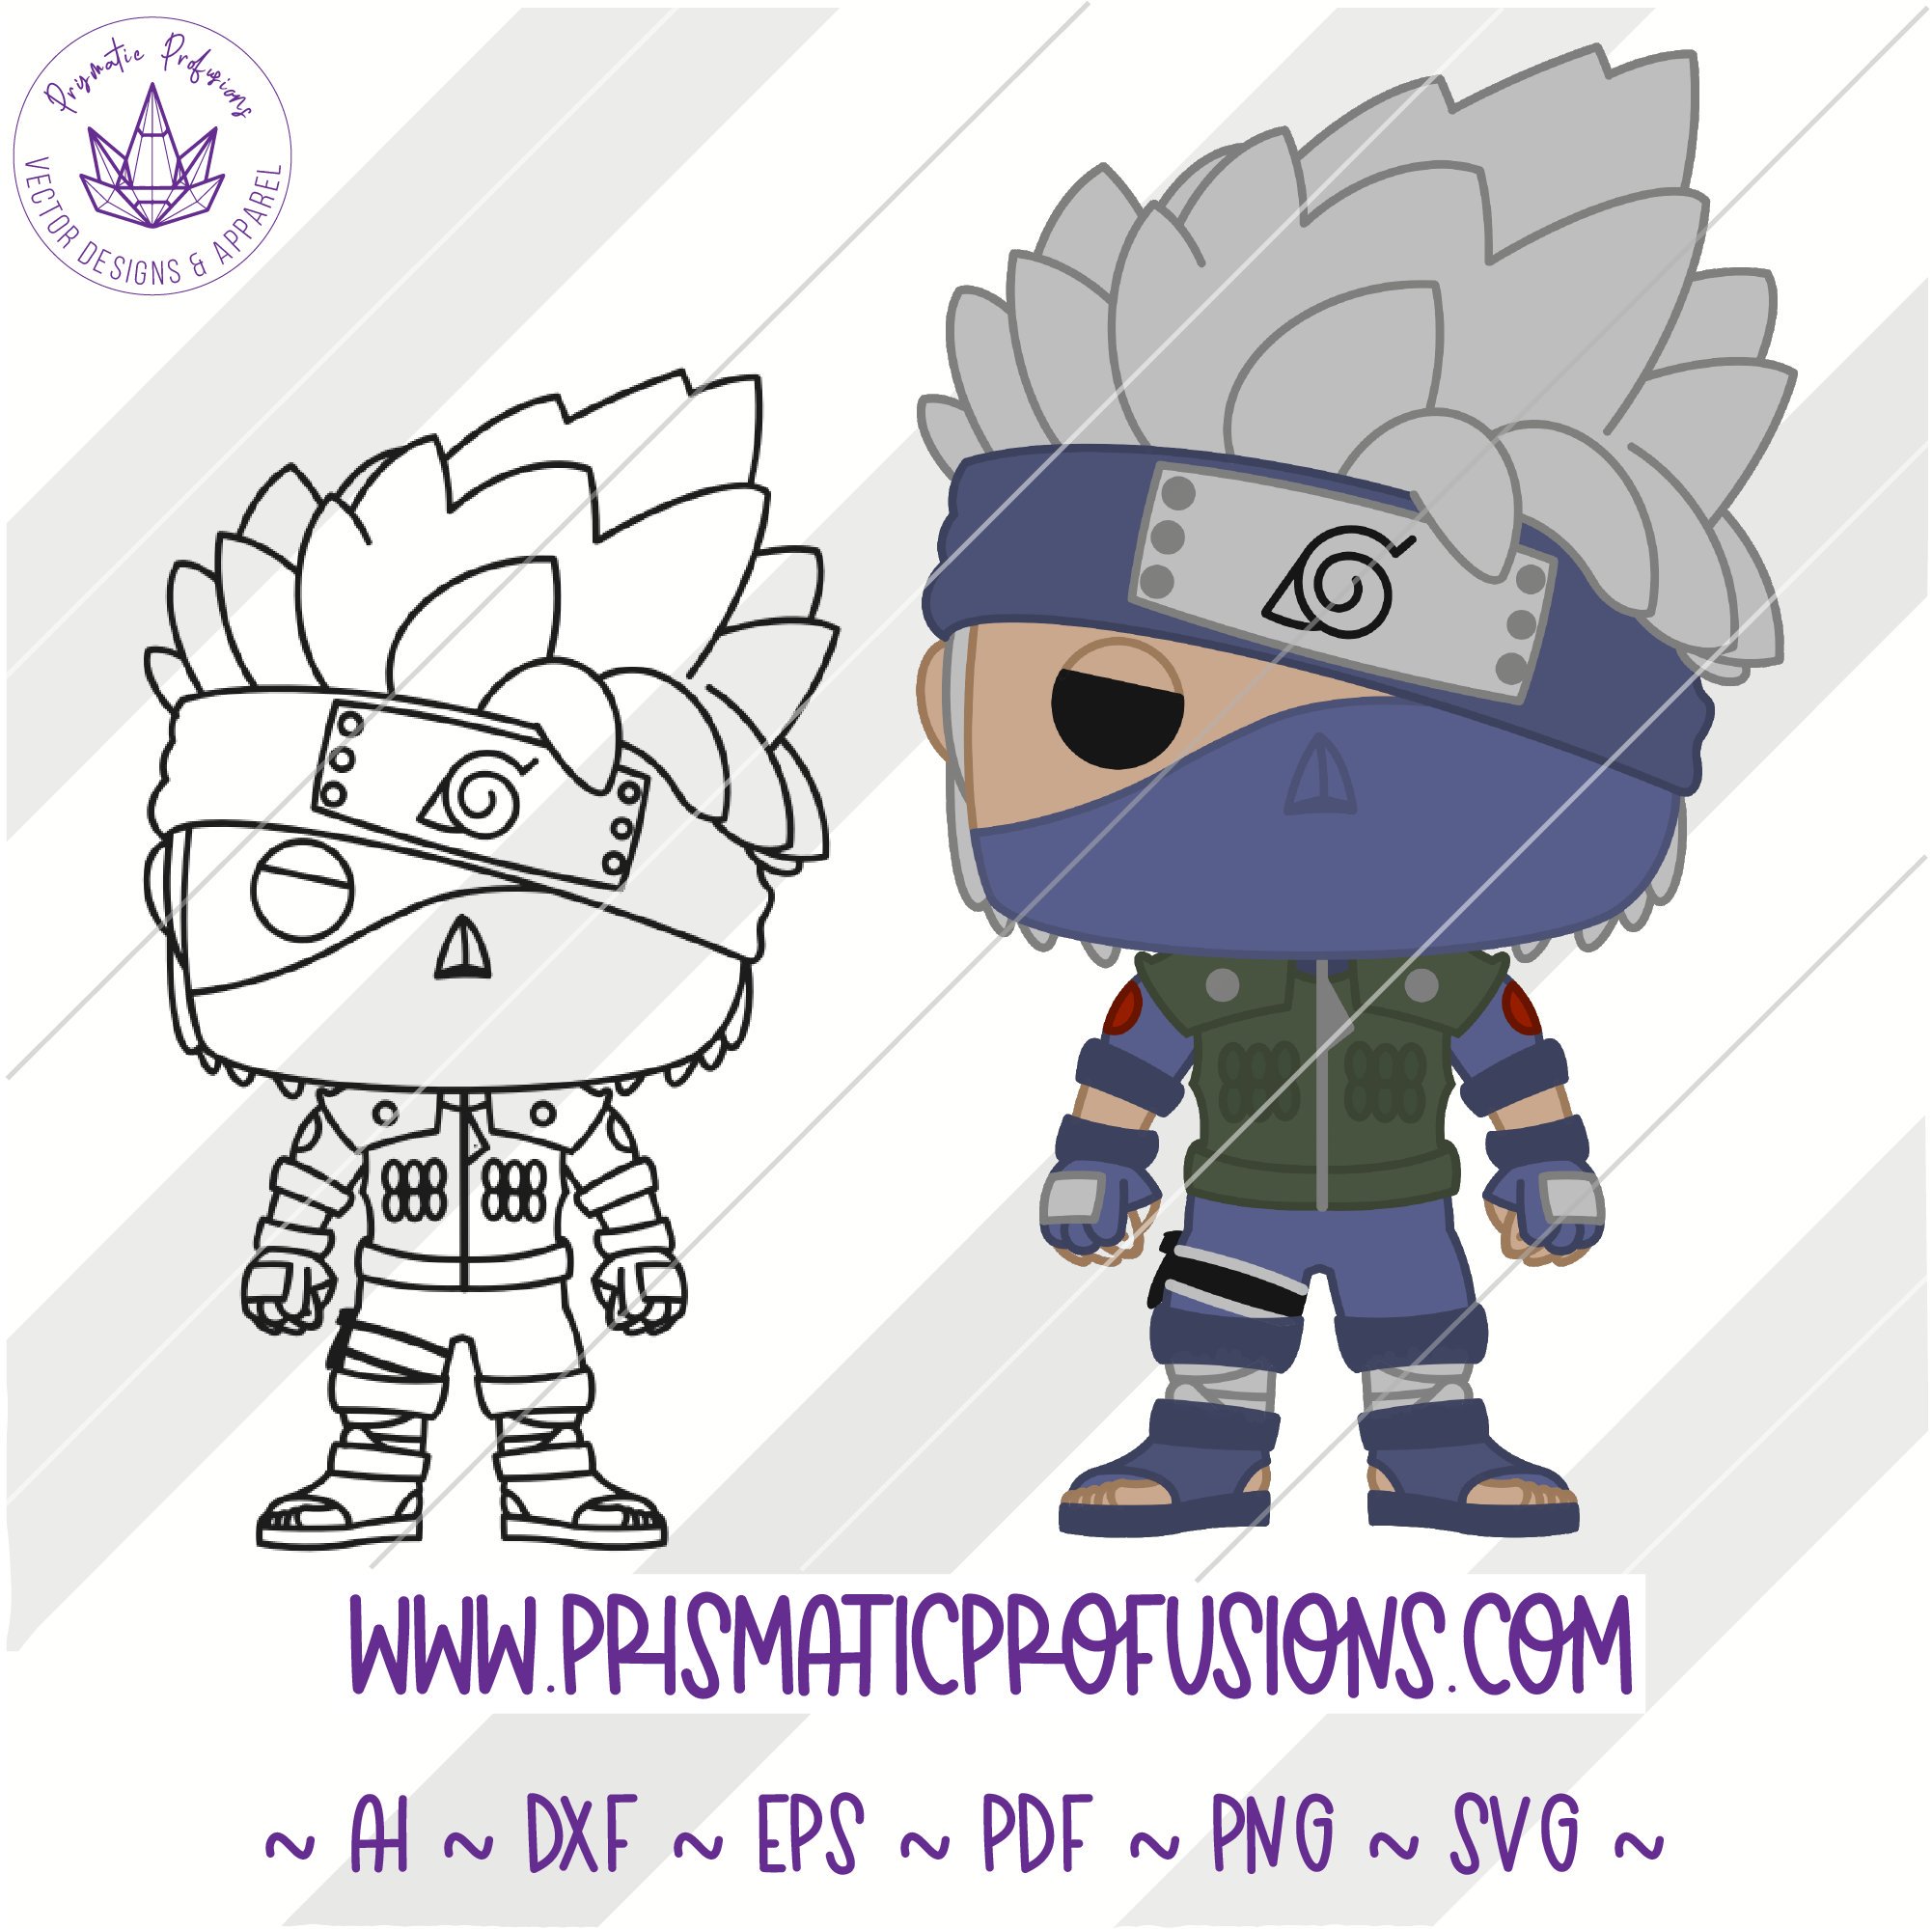 PrismaticProfusions on Twitter: "Funko Pop! Naruto Kakashi Vector! Check  out this and some other designs by visiting https://t.co/yvLJF1zQbJ!  #prismaticprofusions #FunkoPop! #FunkoPop!SVG #NarutoKakashi  #NarutoKakashiSVG #KakashiHatake #svg #svgfiles ...